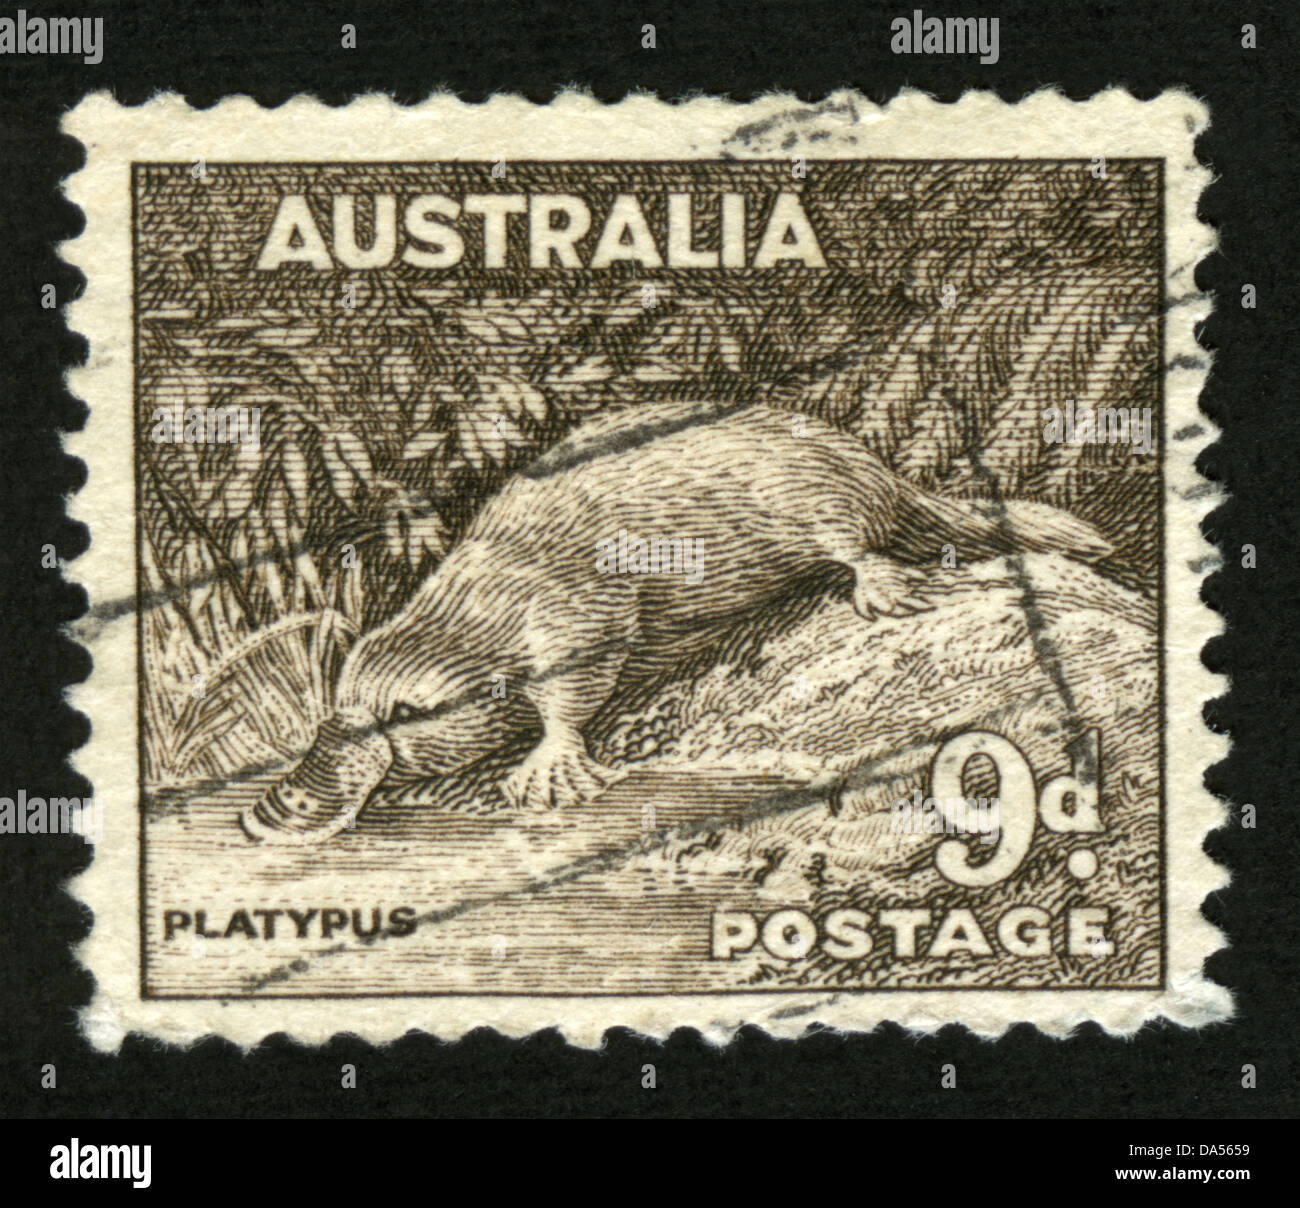 L'Australie, l'Ornithorynque,mark post stamp,Animaux,Animaux,faune,illustrations,mammifères,faune , timbres Banque D'Images